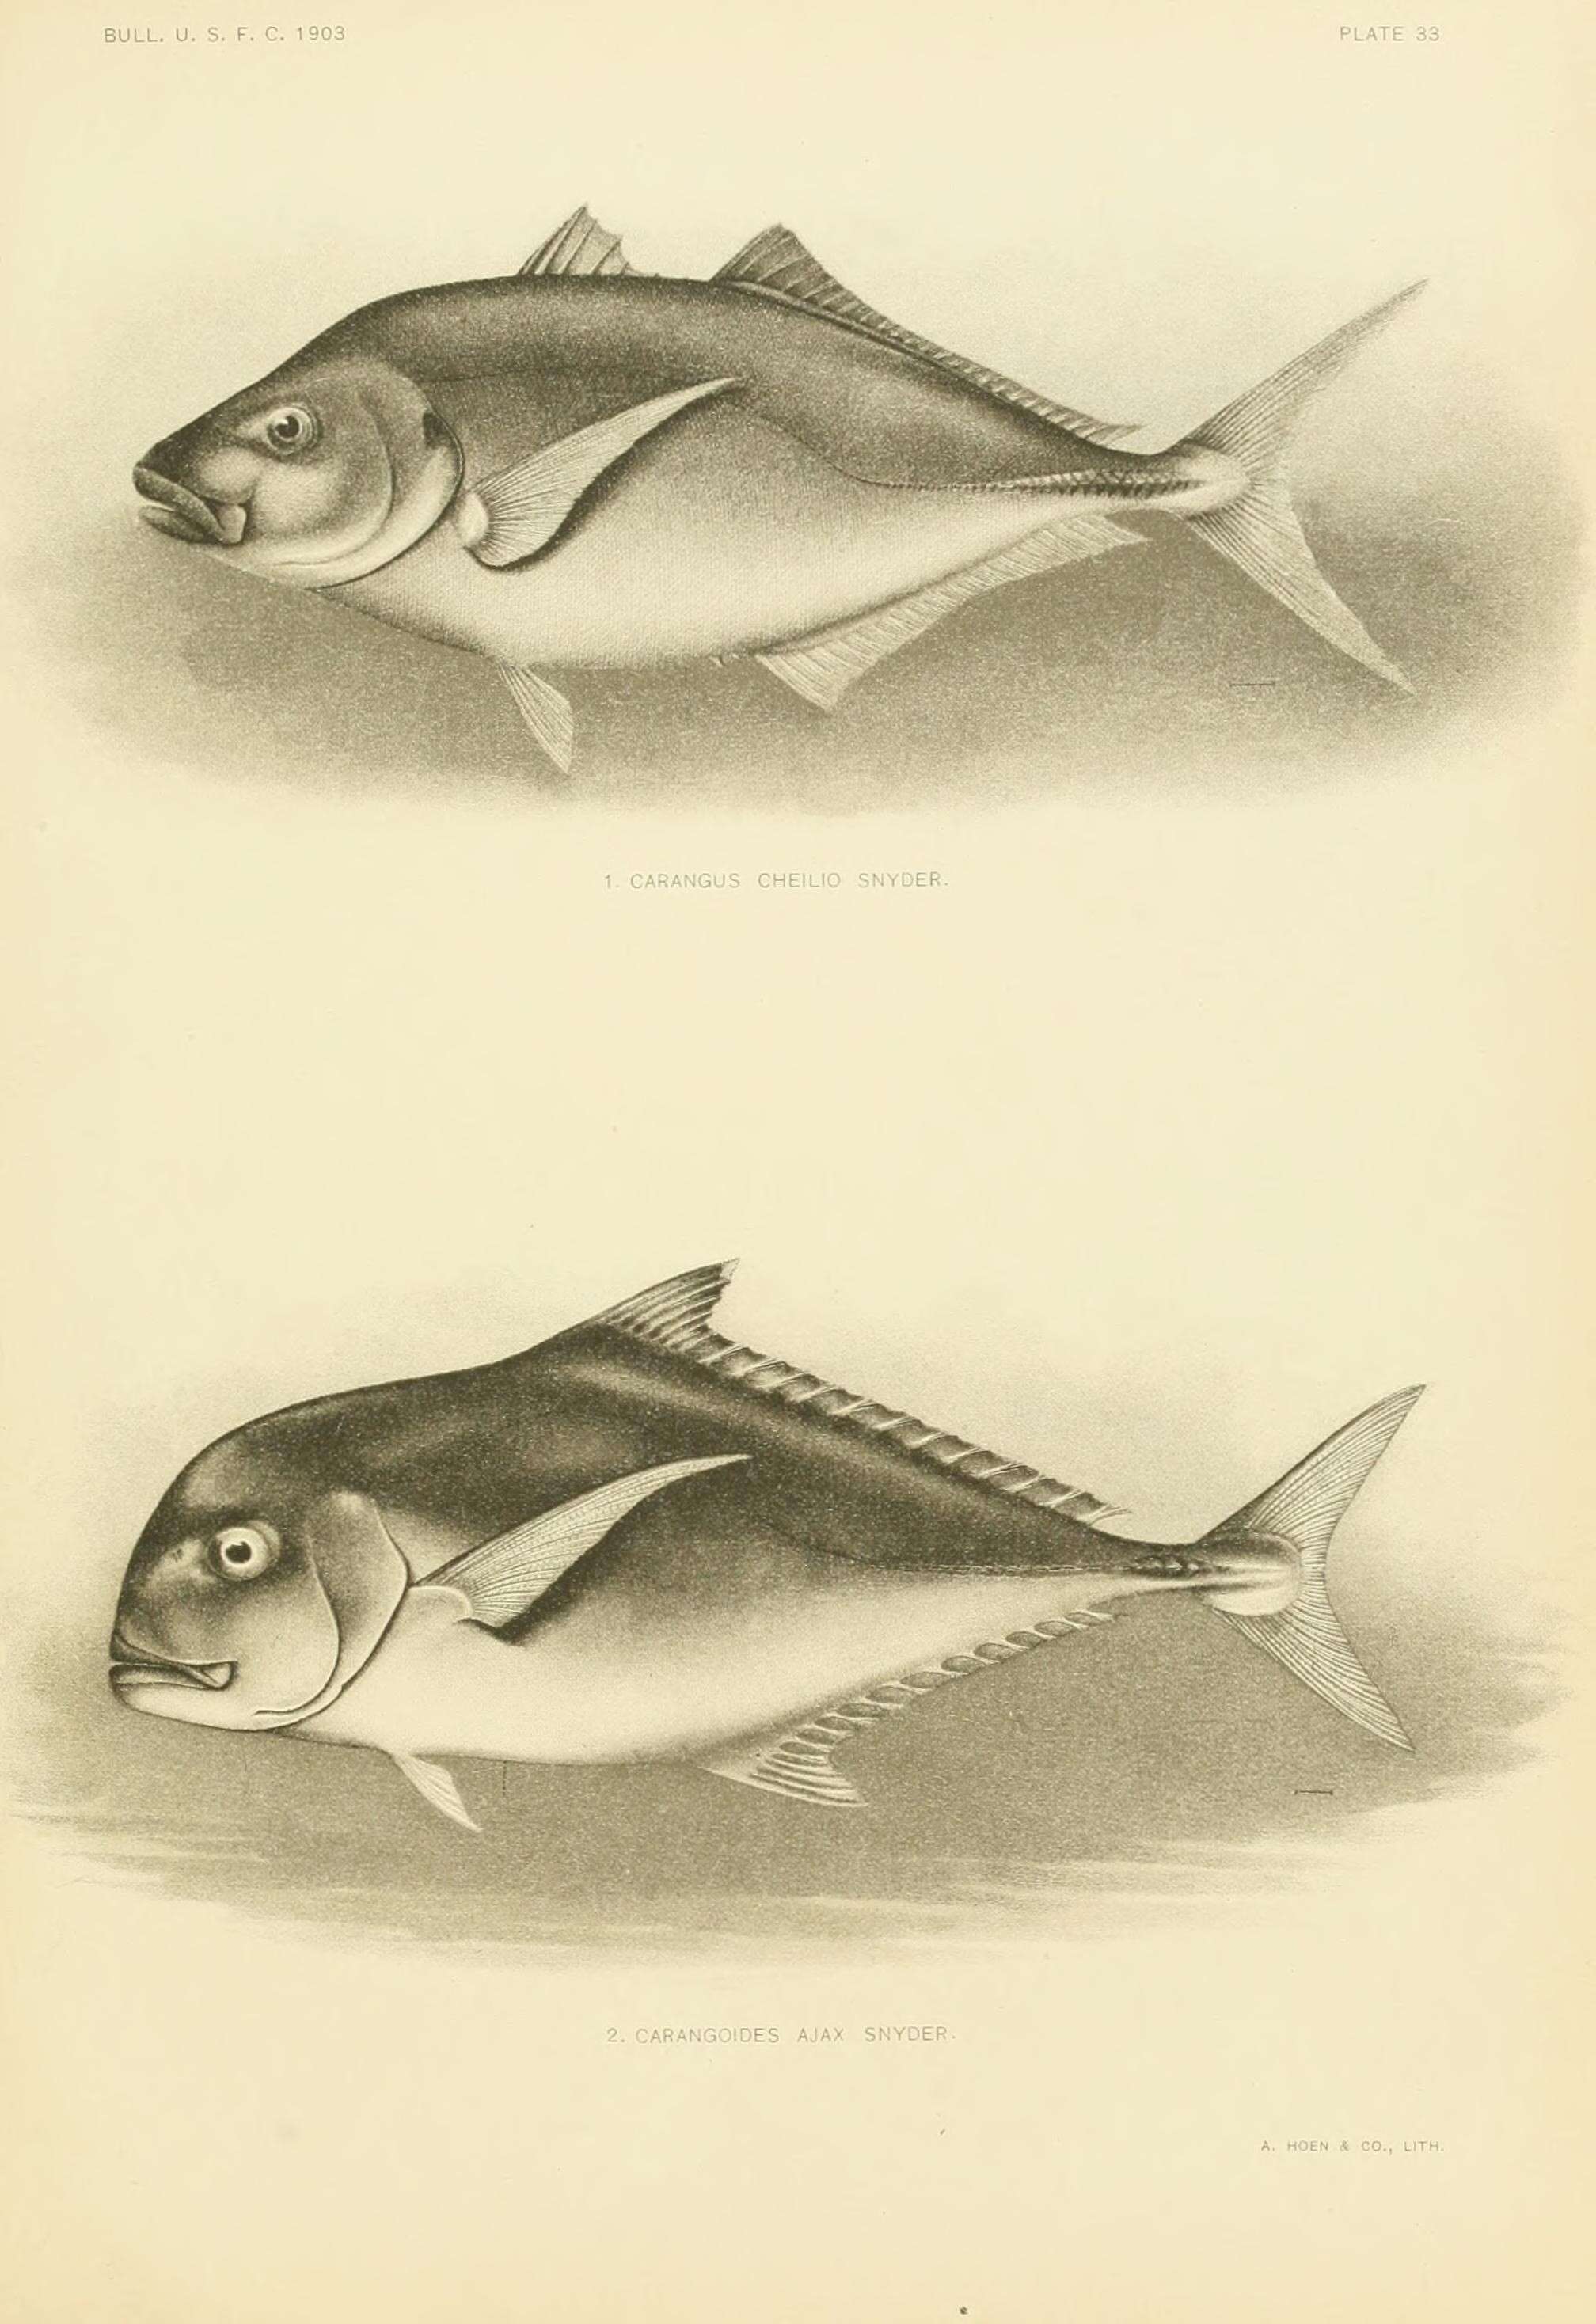 Image of African Pompano